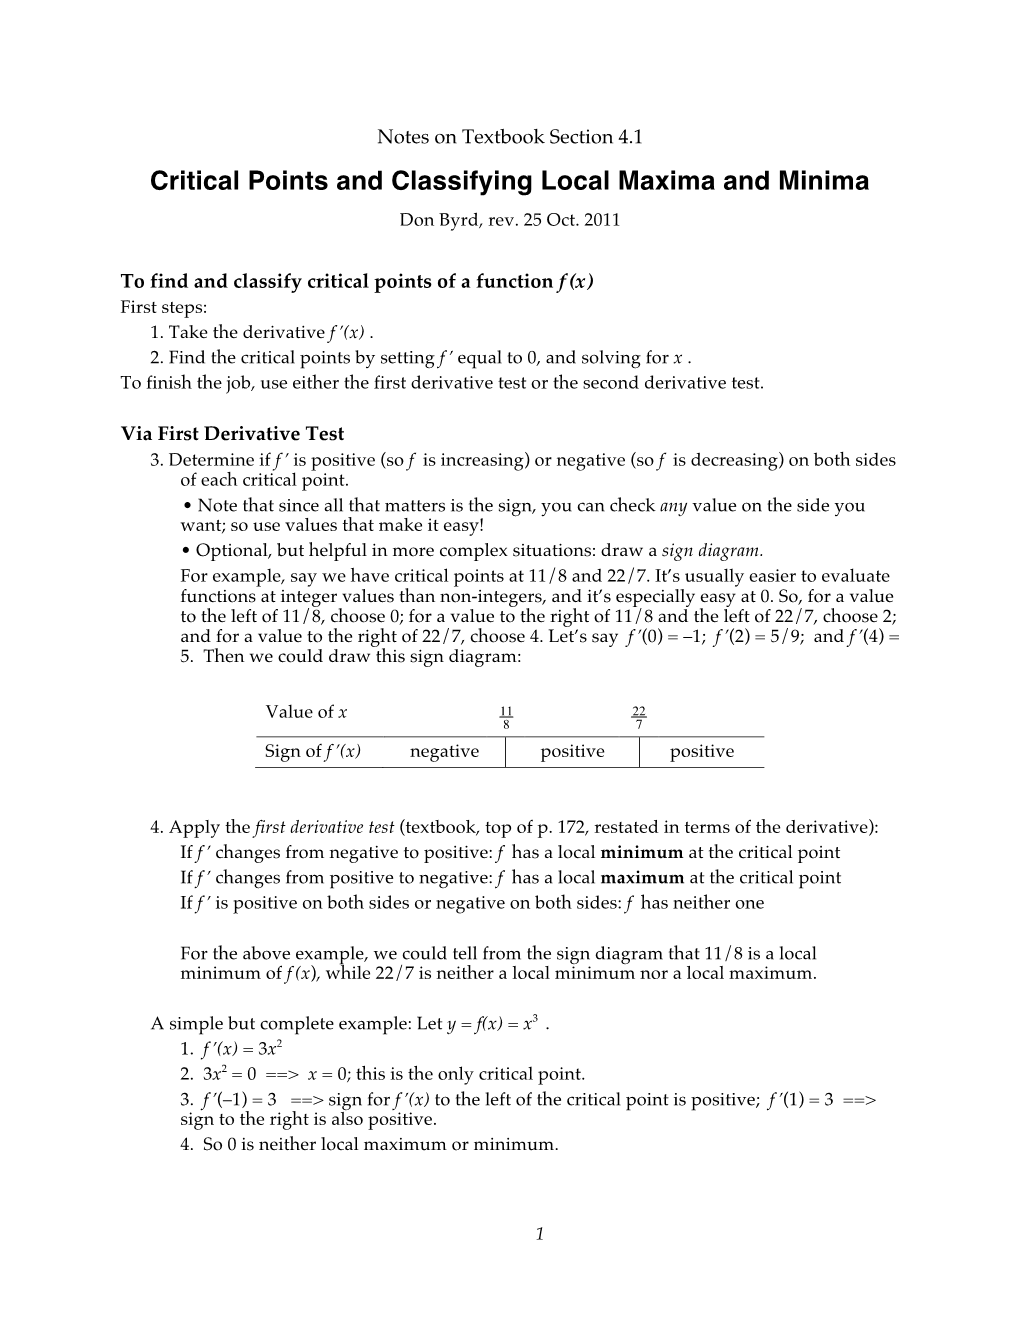 Critical Points and Classifying Local Maxima and Minima Don Byrd, Rev